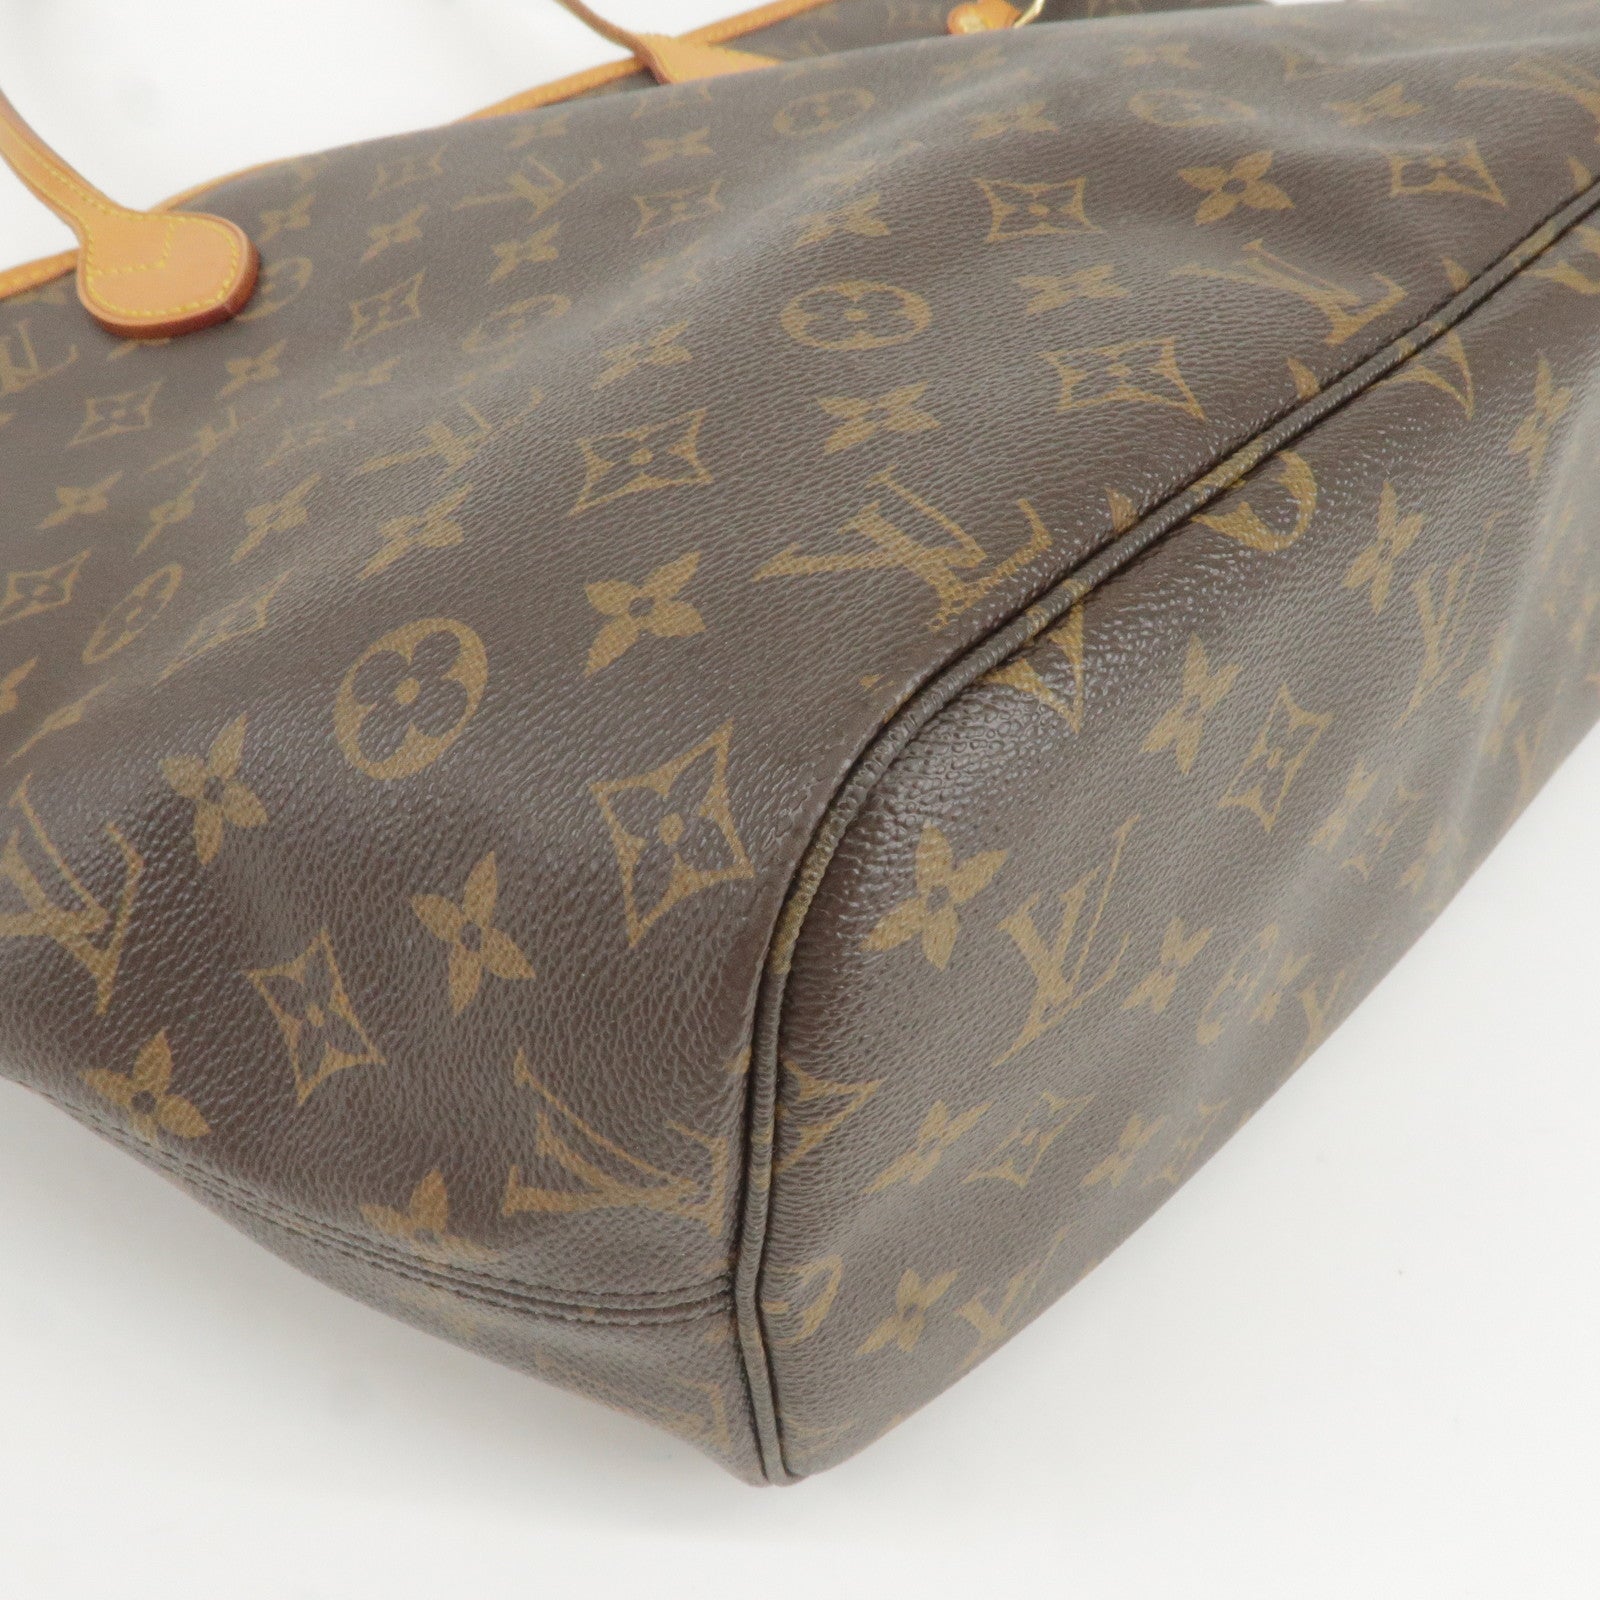 Louis Vuitton x Stephen Sprouse pre-owned Alma MM Tote Bag - Farfetch